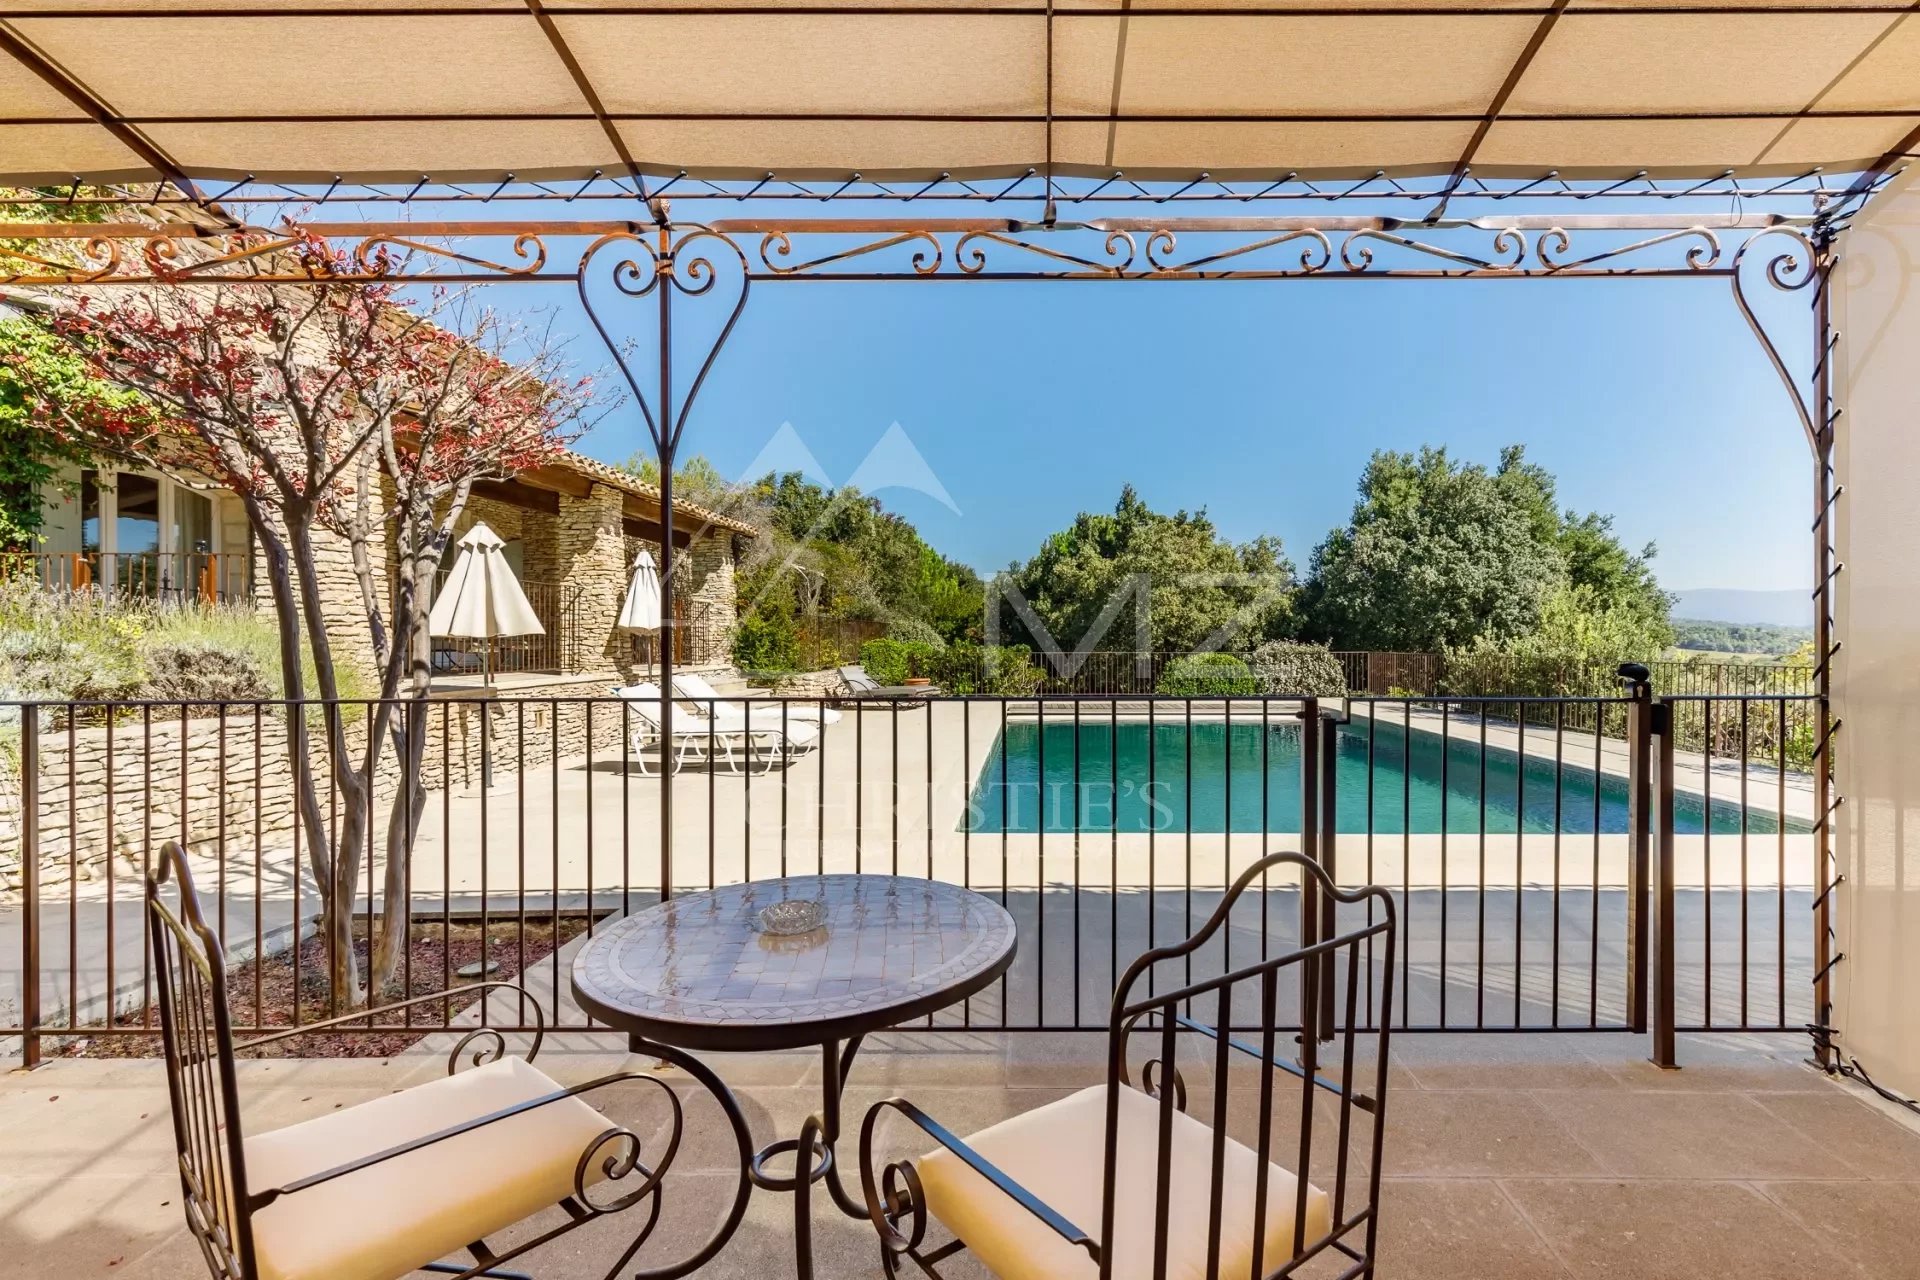 Close to Gordes - Luxurious villa with clear view